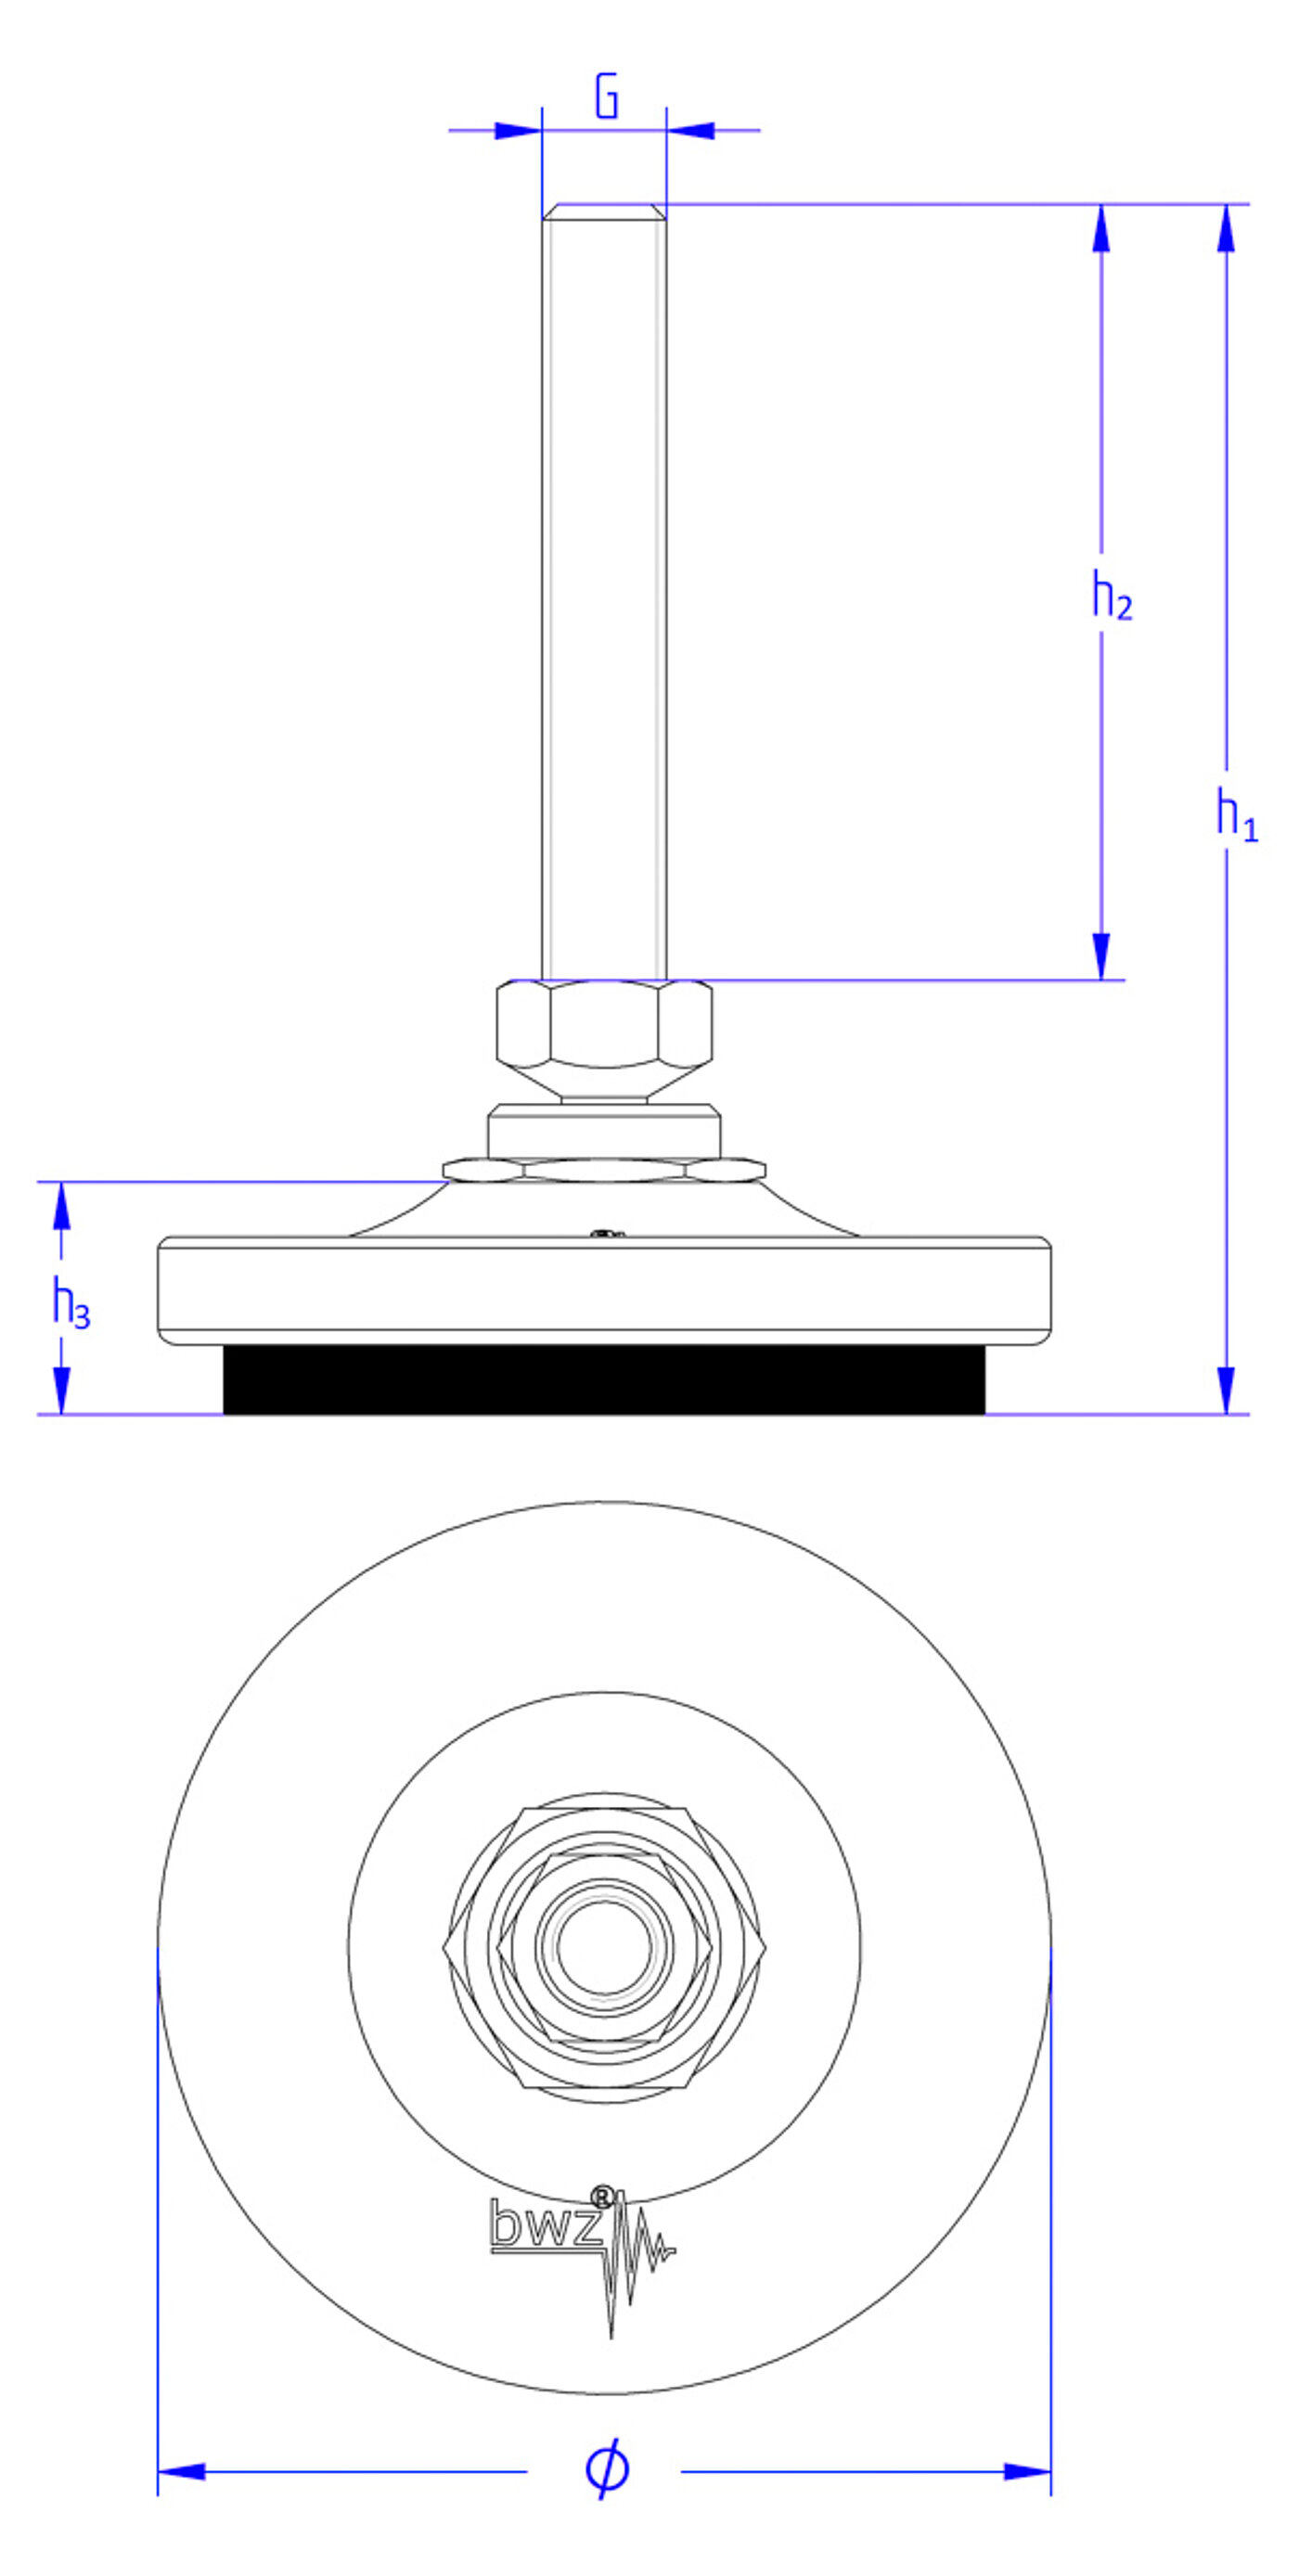 schematic drawing of a round levelling element made of cast iron, with a pendulum-action levelling screw placed in a pressure fitting with safety ring on top of the cast iron corpus, and elastomer for vibration damping at the bottom, in the side view and the view from the top